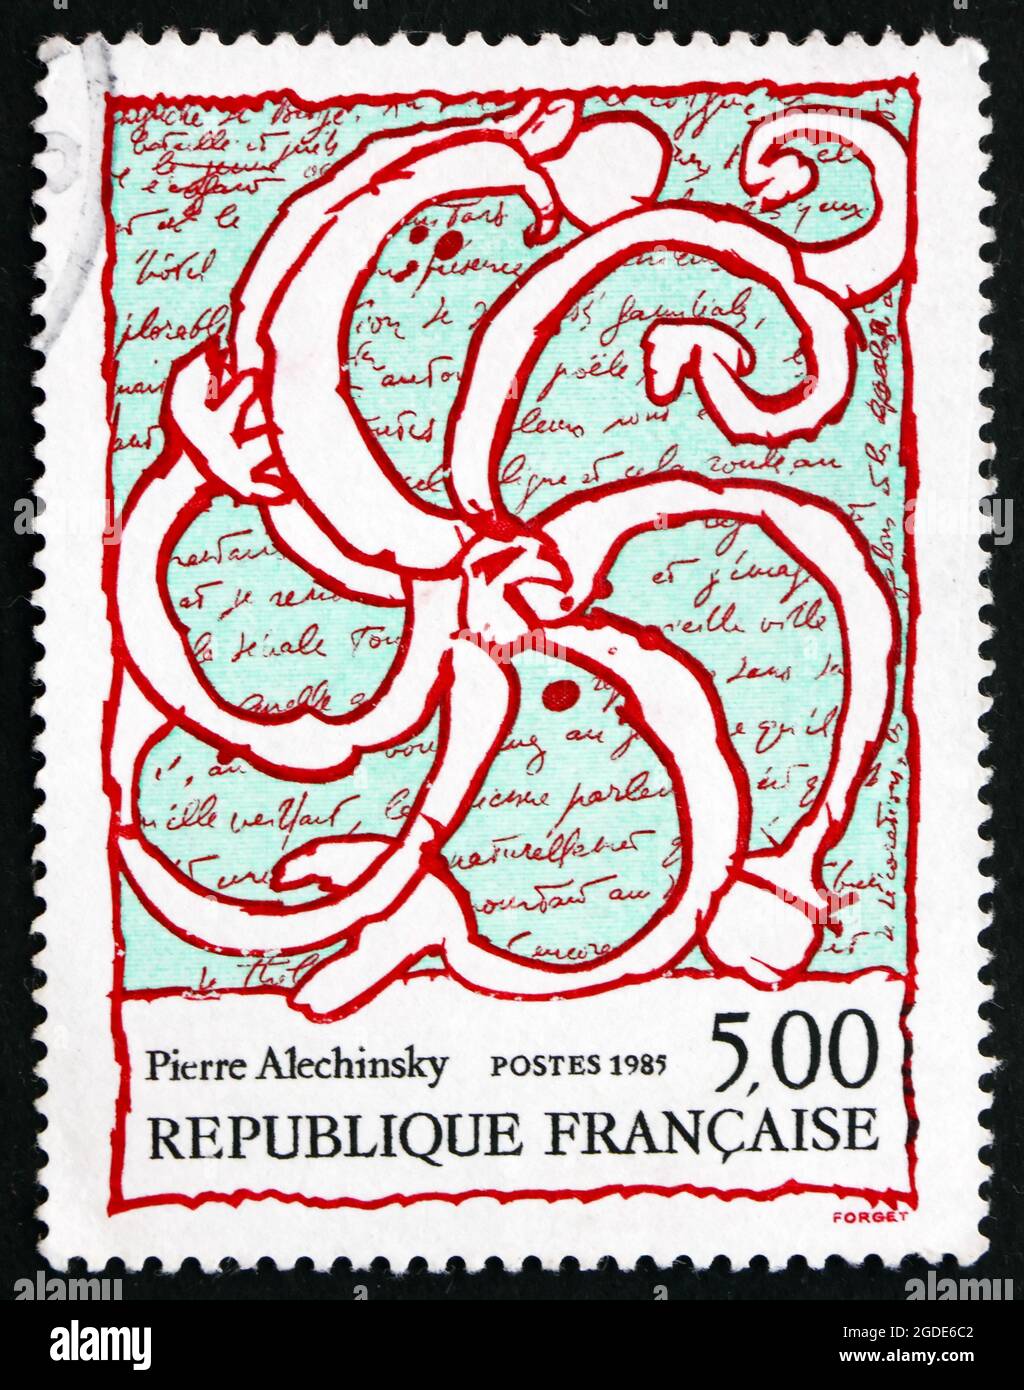 FRANCE - CIRCA 1985: a stamp printed in the France shows Octopus Overlaid on Manuscript, Painting by Pierre Alechinsky, circa 1985 Stock Photo